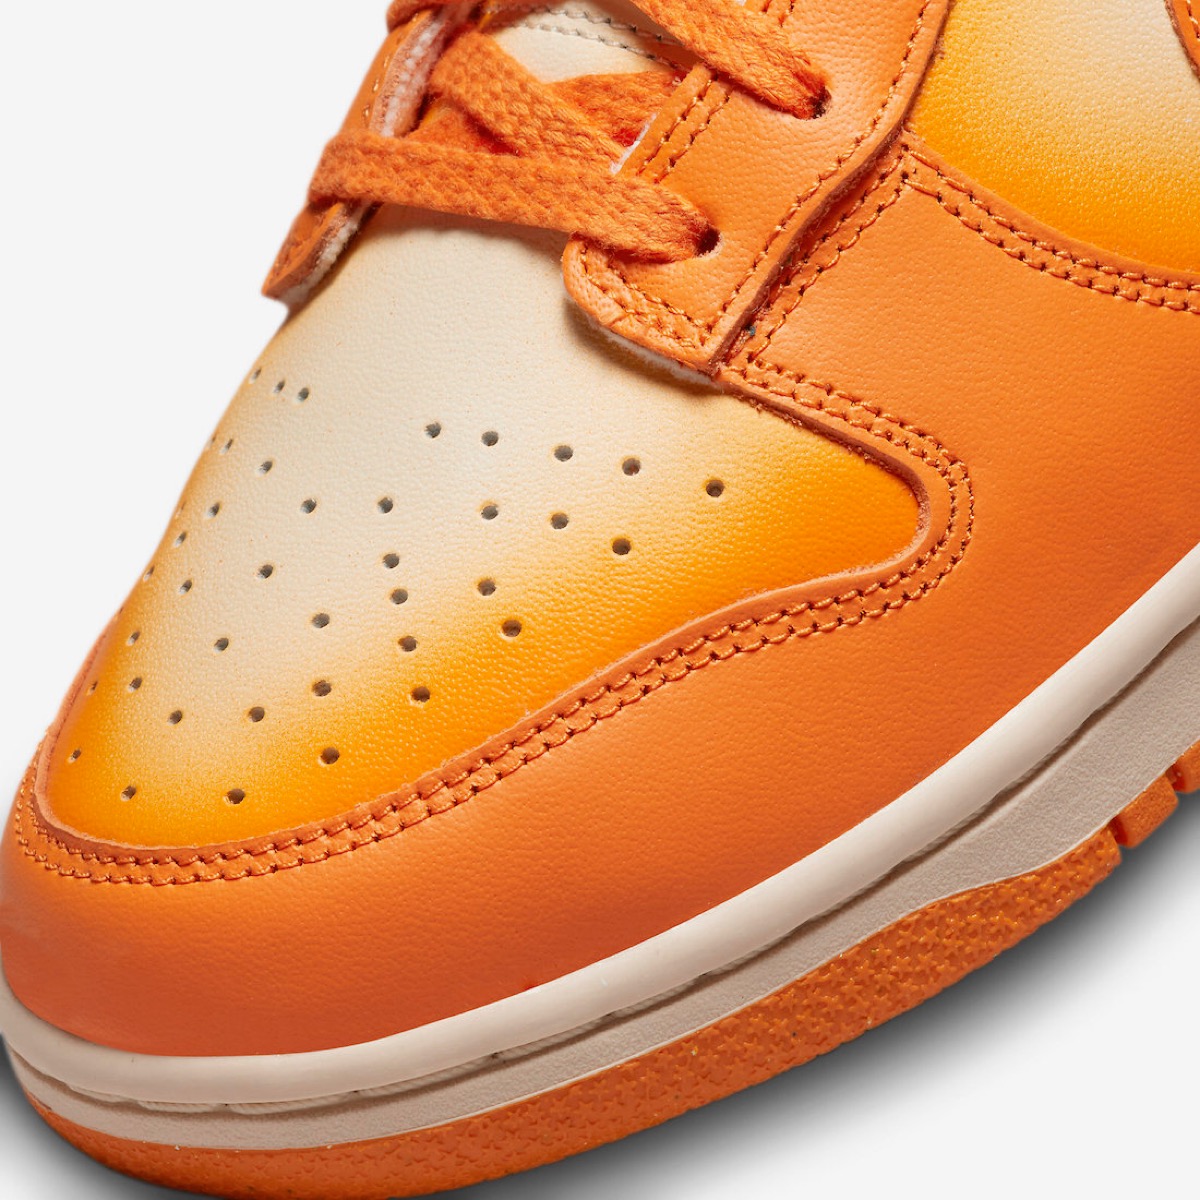 Nike Wmns Dunk Low “Magma Orange”が10月1日より発売予定 | UP TO DATE